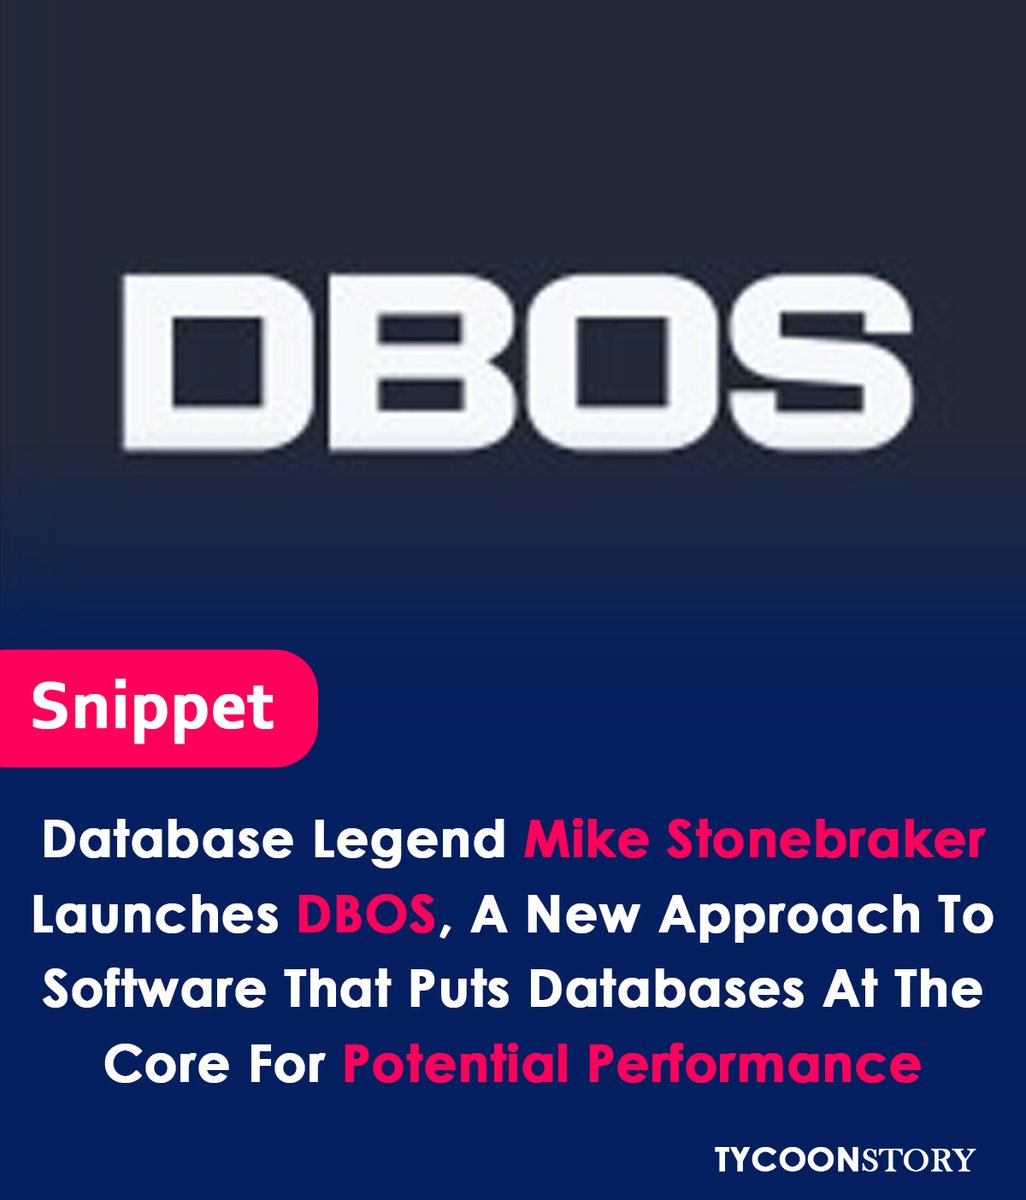 Mike Stonebraker, a database pioneer, launches DBOS, a revolutionary OS with a database at its core
#database #operatingsystem #cloud #data #sql #mit #stanford #databricks #venturecapital #seedfunding #research #innovation #security #ransomware #timetraveldebugging @DBOS_Inc